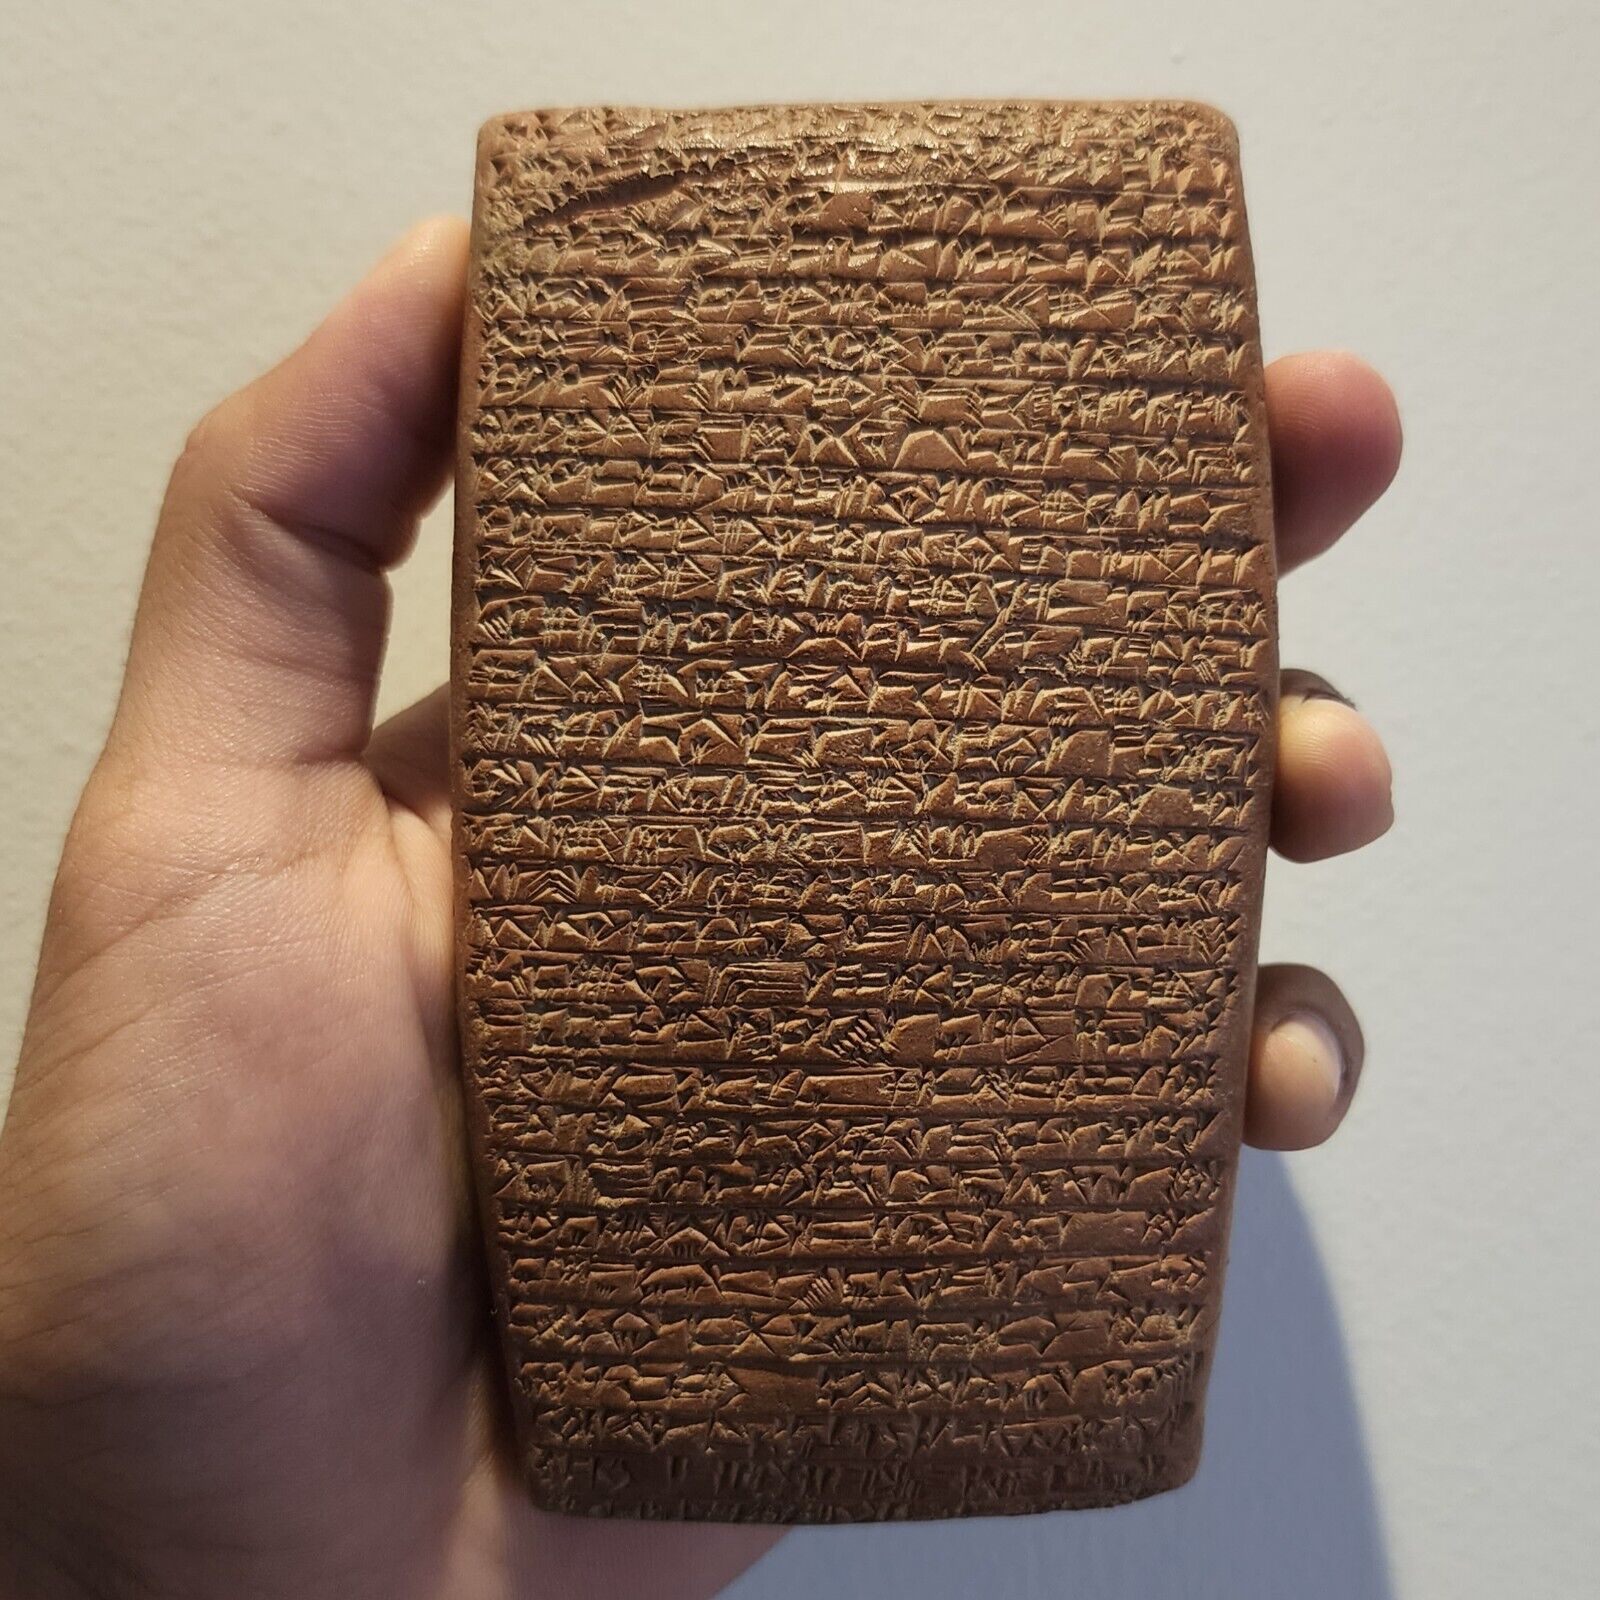 CIRCA NEAR EASTERN CUNEIFORM TERRACOTTA CLAY TABLET WITH EARLY FORM OF WRITINGS.